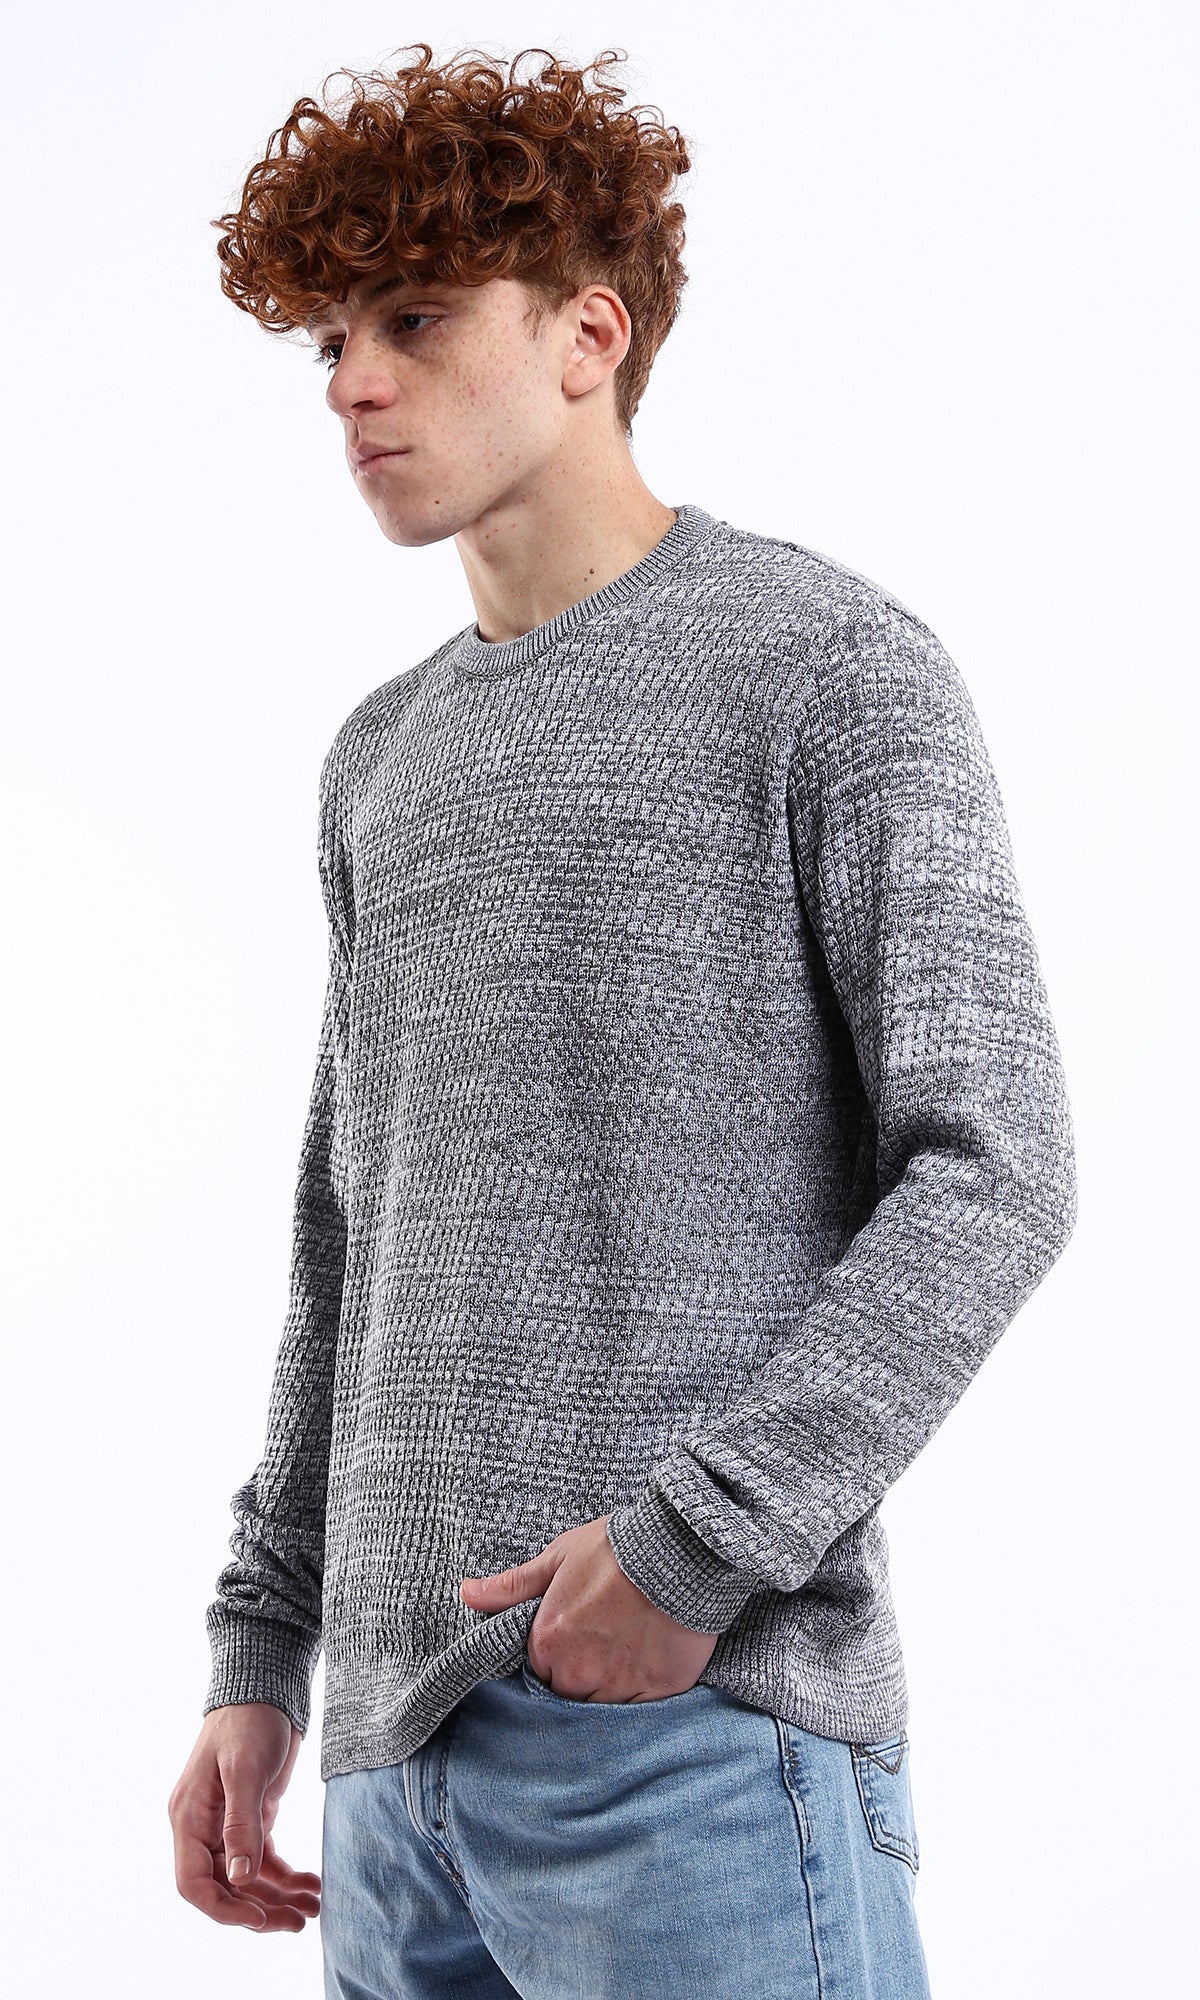 O175246 Round Neck Knitted Grey & White Pullover